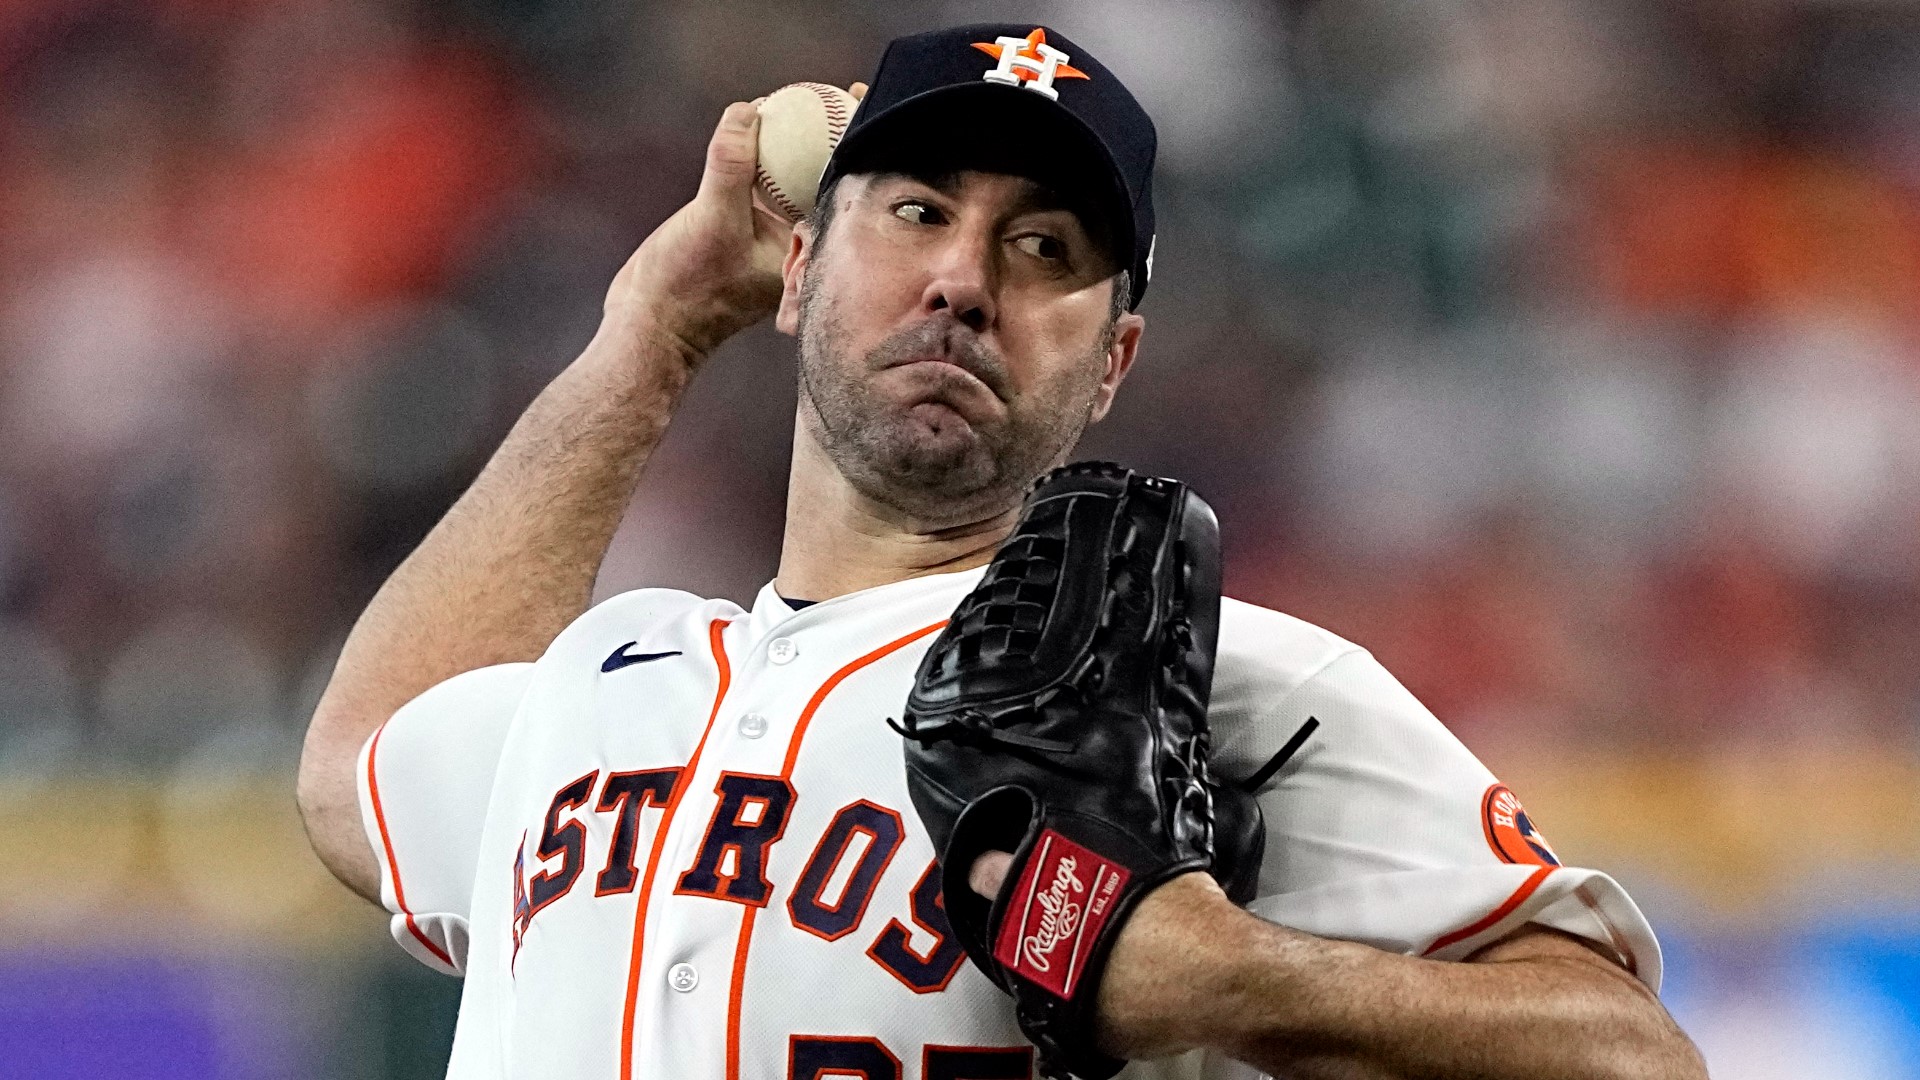 Justin Verlander and Astros to Reunite After Deal with Mets